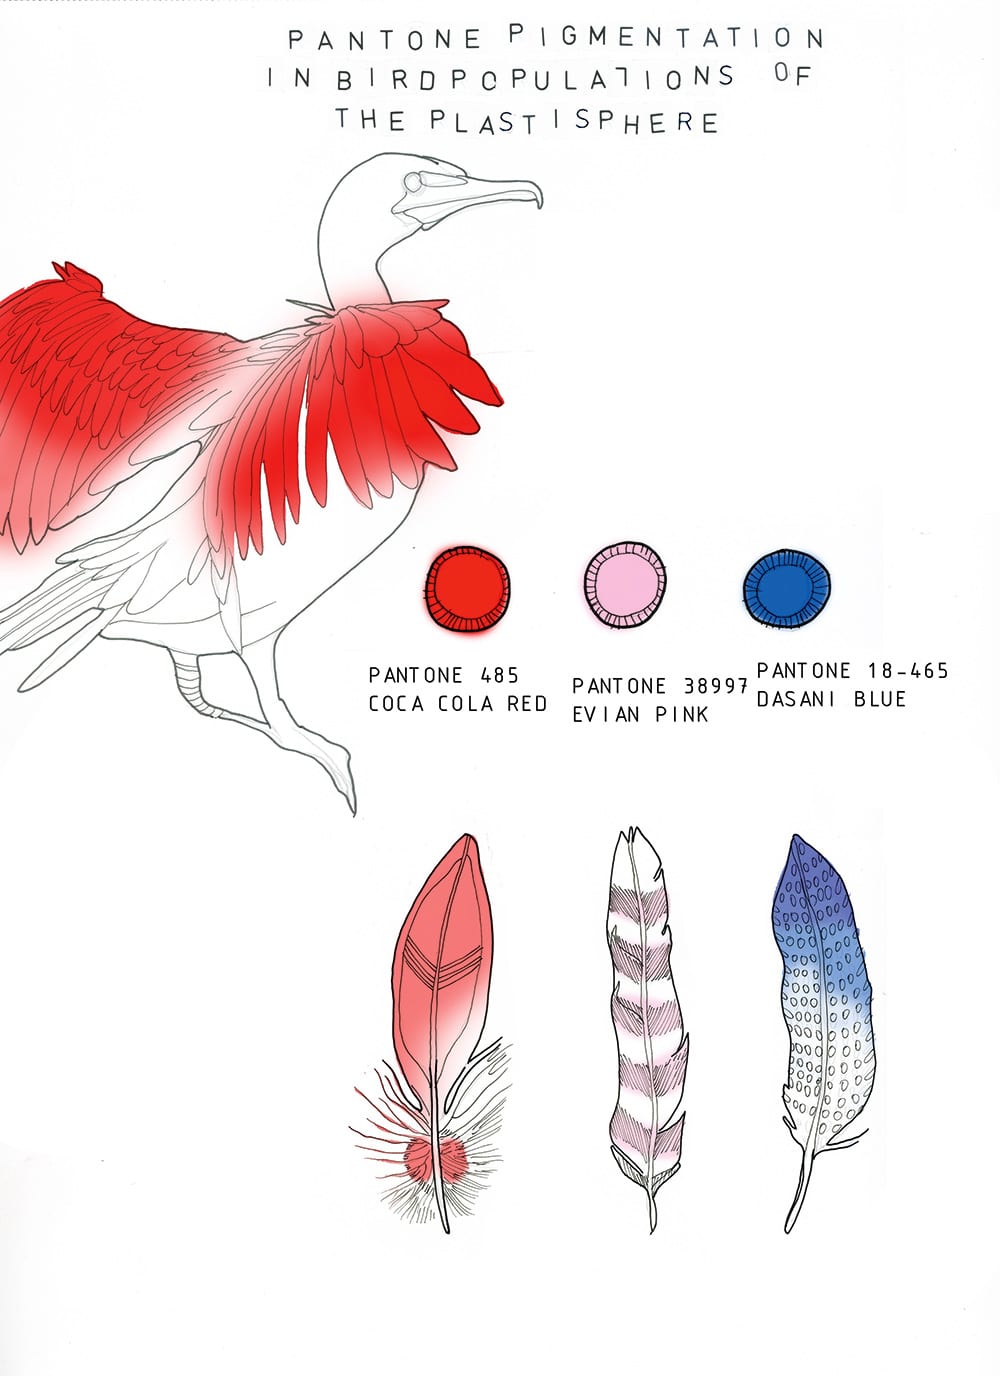 Drawing of a bird with red feathered wings with the title »Pantone Pigmentation in Bird Populations of the Plastisphere« written above the drawing. Below you find the drawing of three bottle caps labeled with the names of the colors they are drawn in: Pantone 485 / Coca Cola Red (left), Pantone 38997 / Evian Pink (Middle) and Pantone 18-465 / Dasani Blue (right). Below the colored bottle caps there are three feathers depicted that are colored in the colors of the bottle caps.